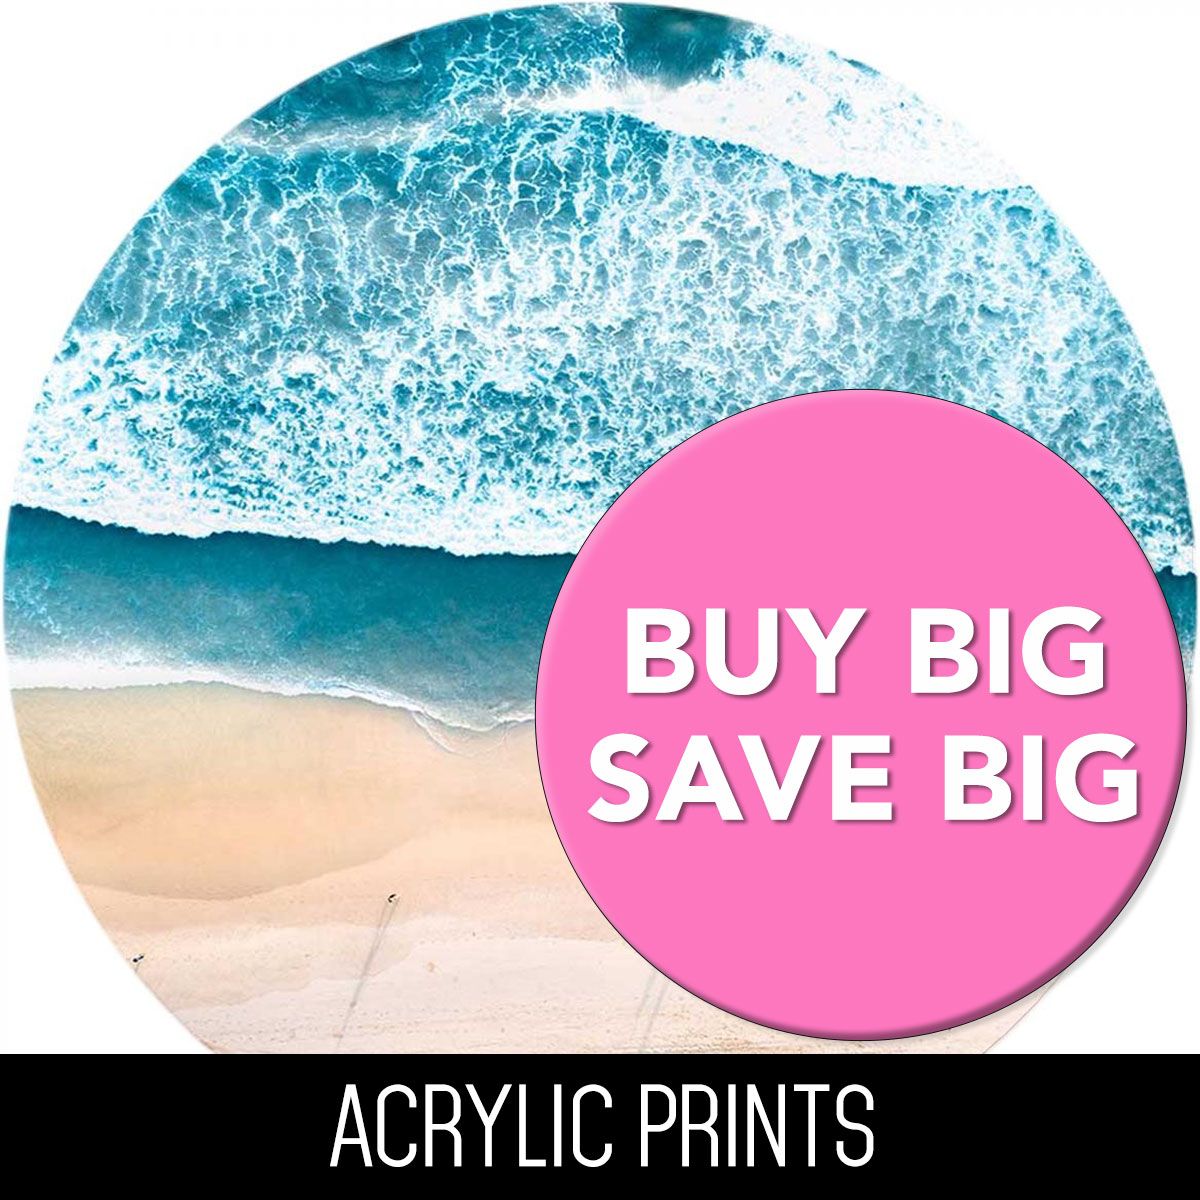 View All Acrylic Prints